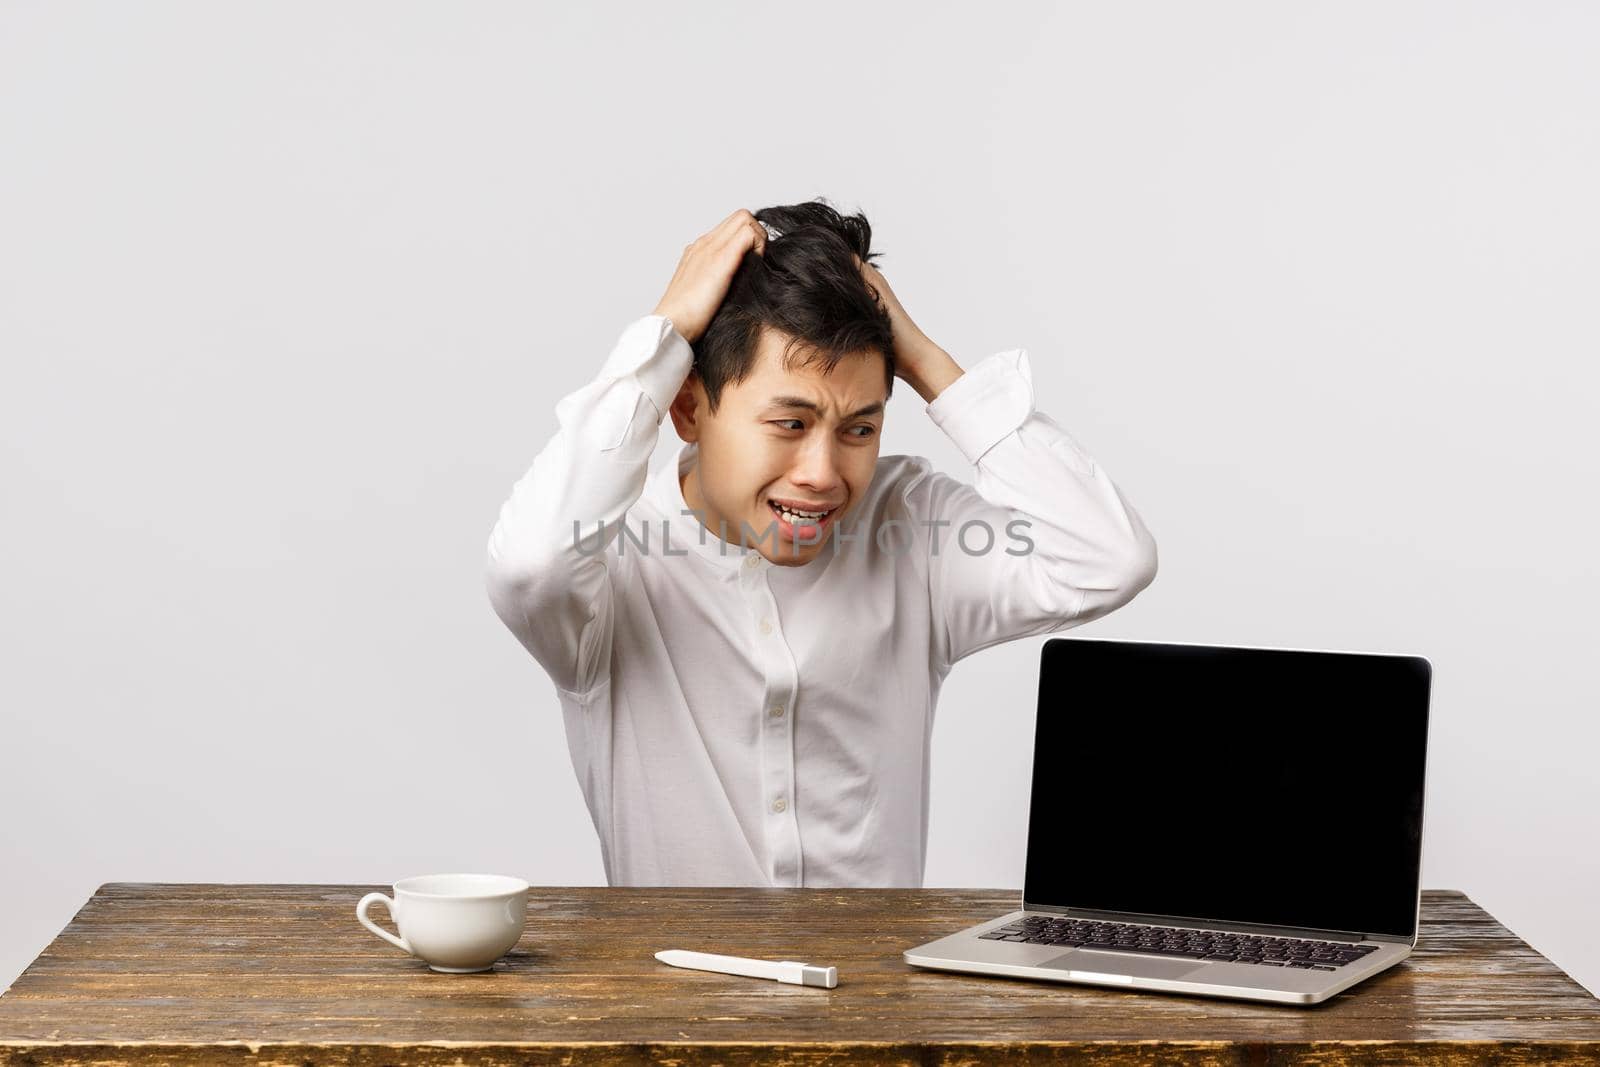 Alarmed and panicking chinese guy pulling hair from head sitting troubled and distressed, having huge problem, staring at laptop with anxious, nervous expression, sitting office white background.